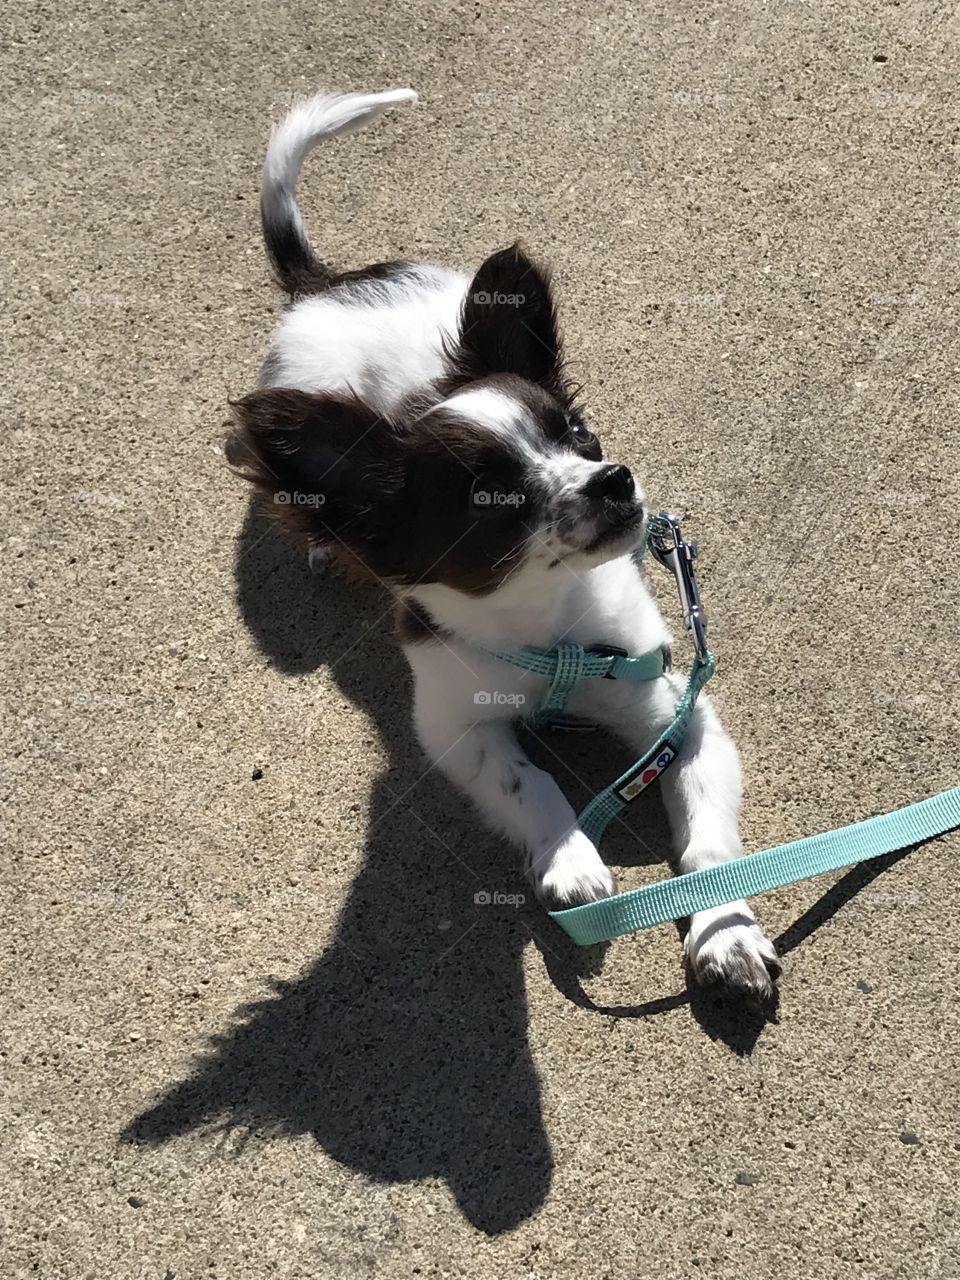 Baby Chihuahua Resting on a Walk